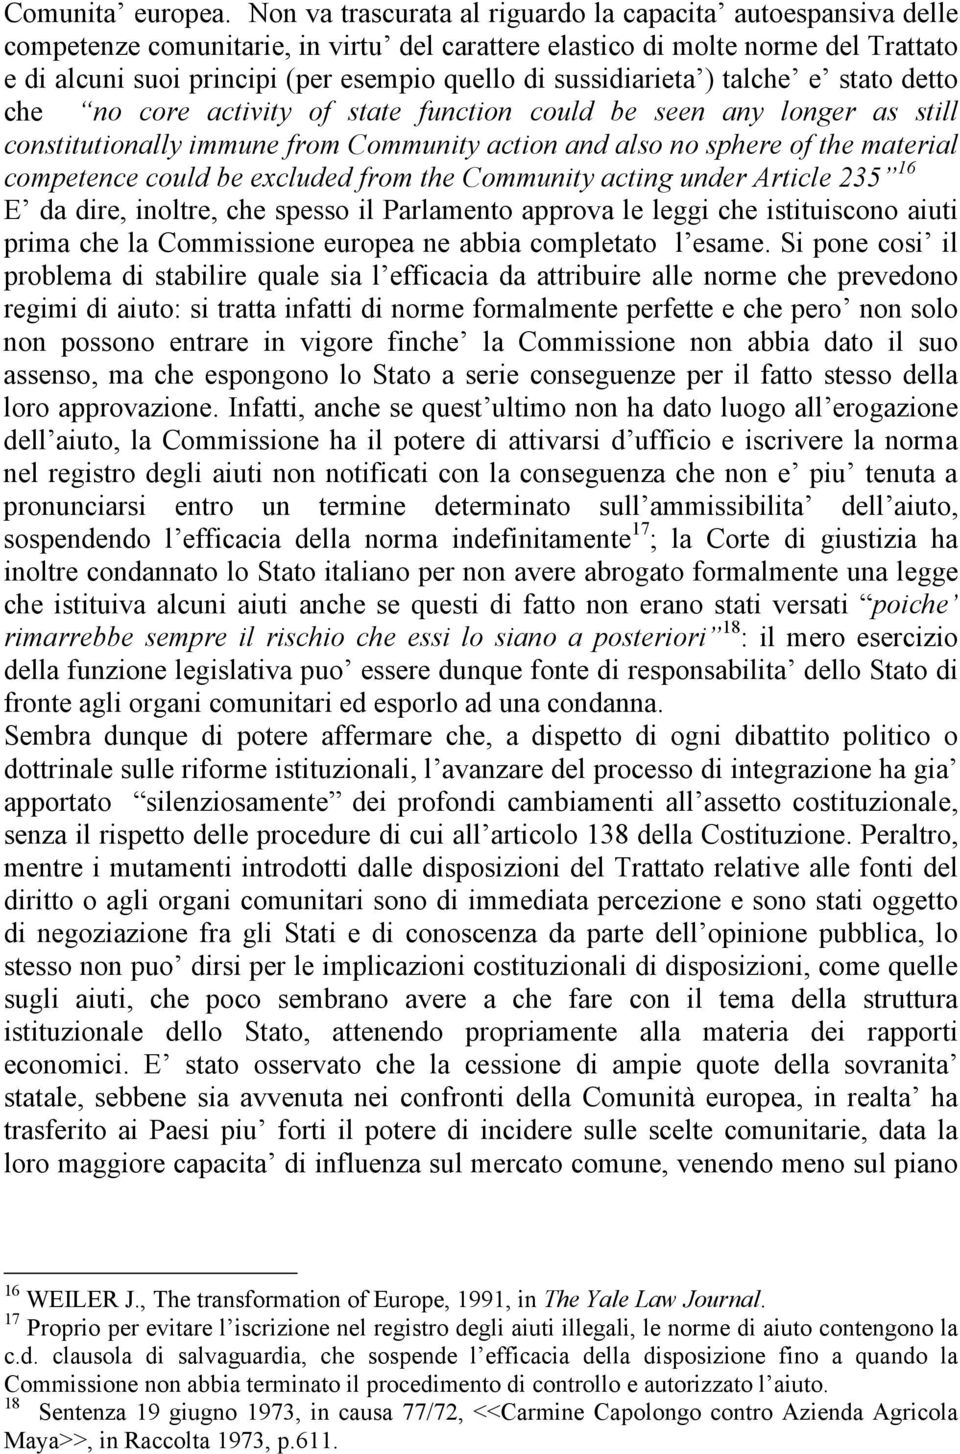 sussidiarieta ) talche e stato detto che no core activity of state function could be seen any longer as still constitutionally immune from Community action and also no sphere of the material